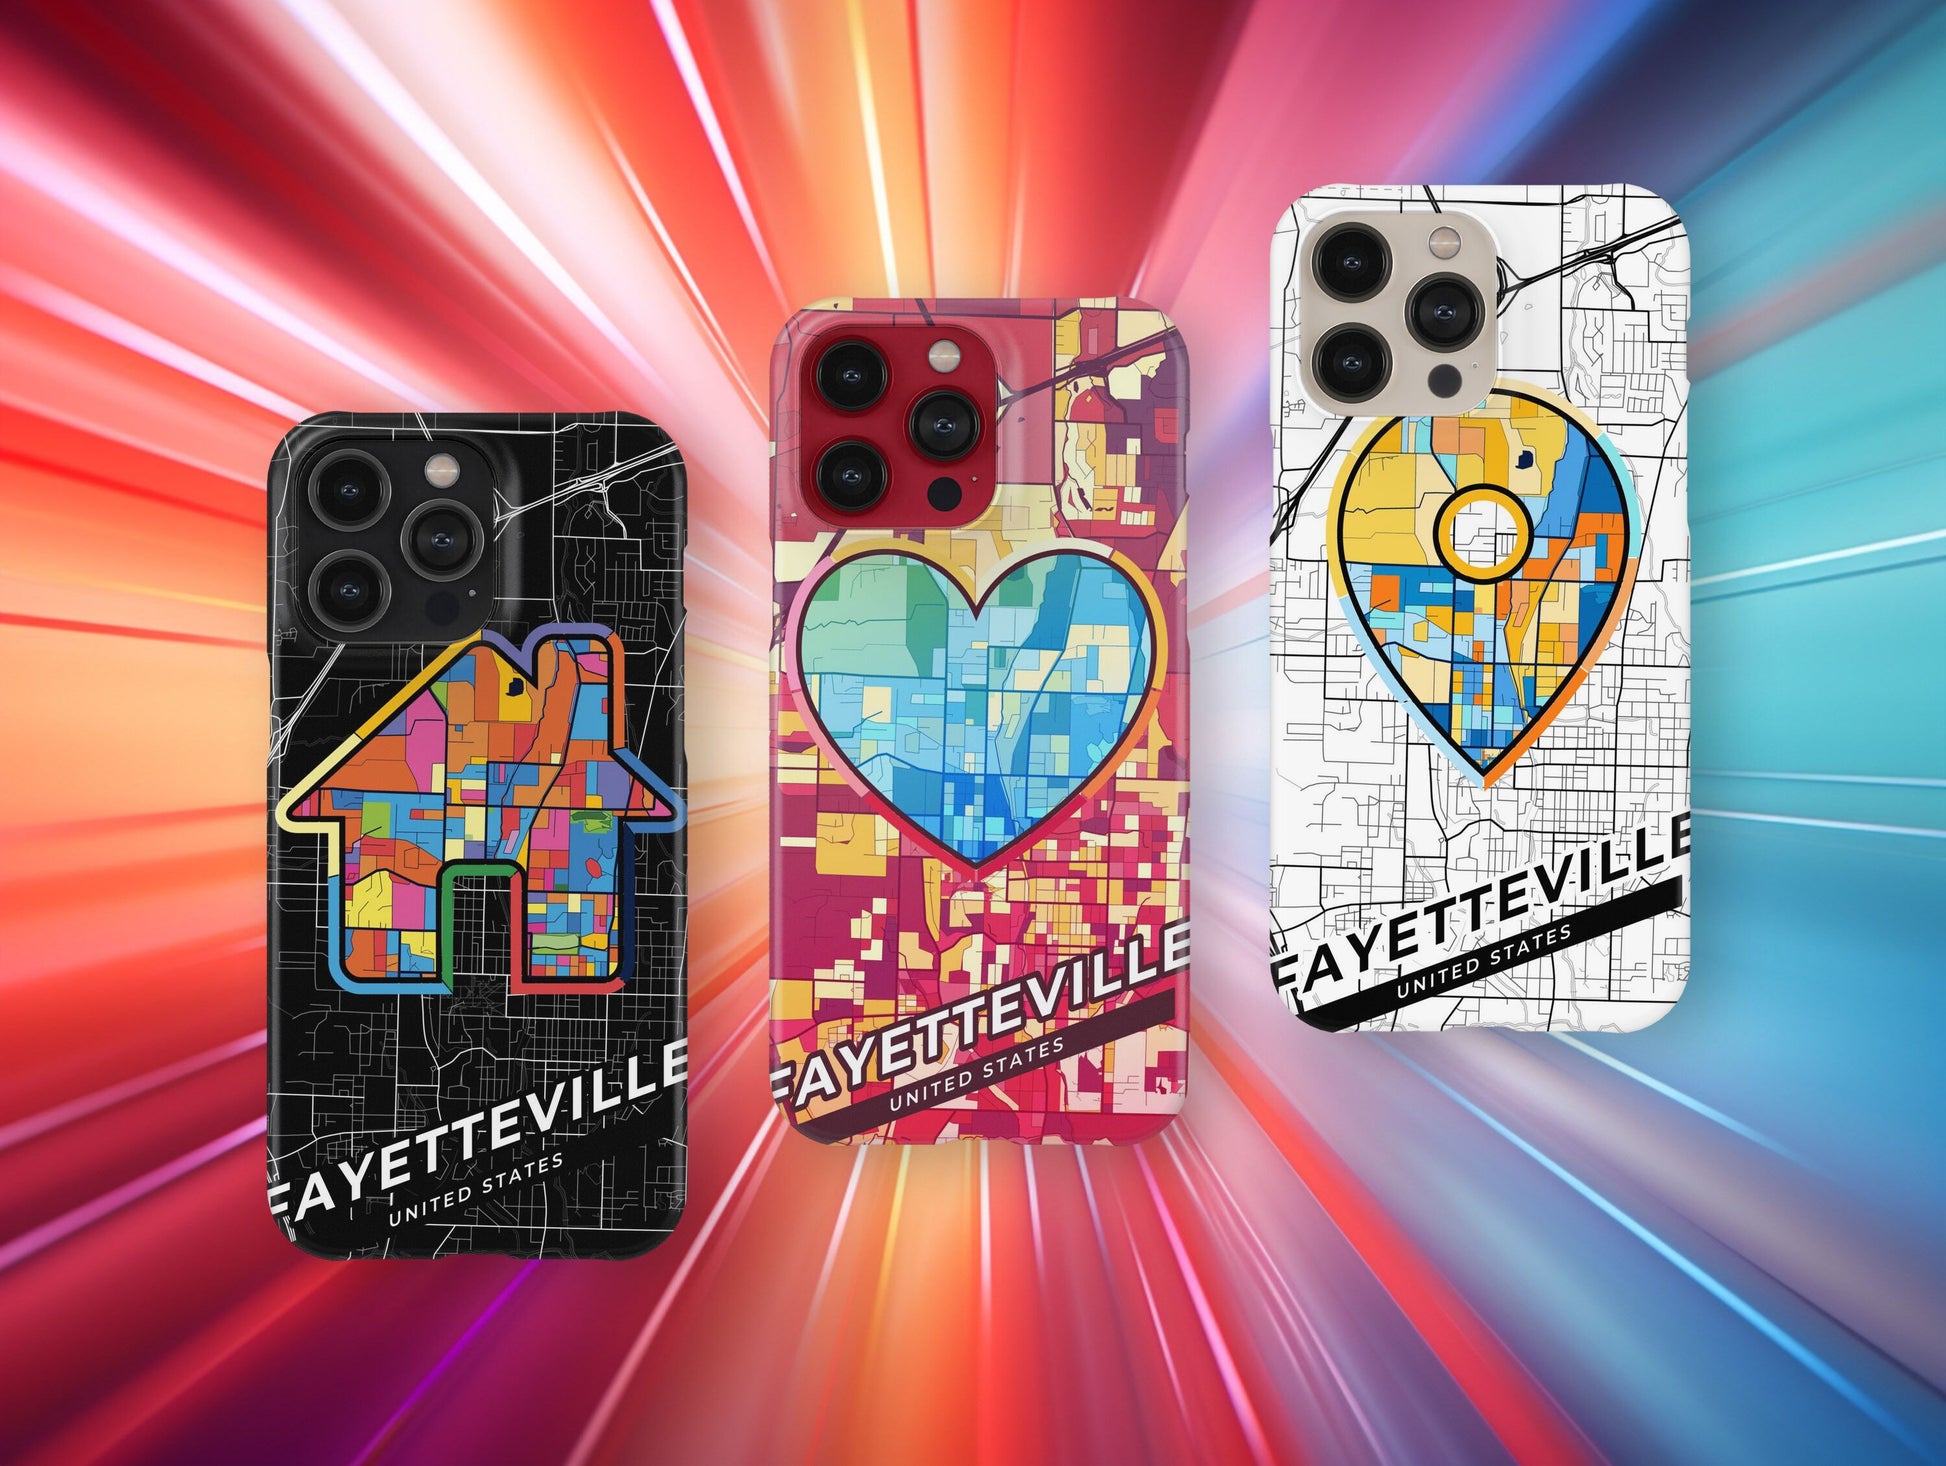 Fayetteville Arkansas slim phone case with colorful icon. Birthday, wedding or housewarming gift. Couple match cases.